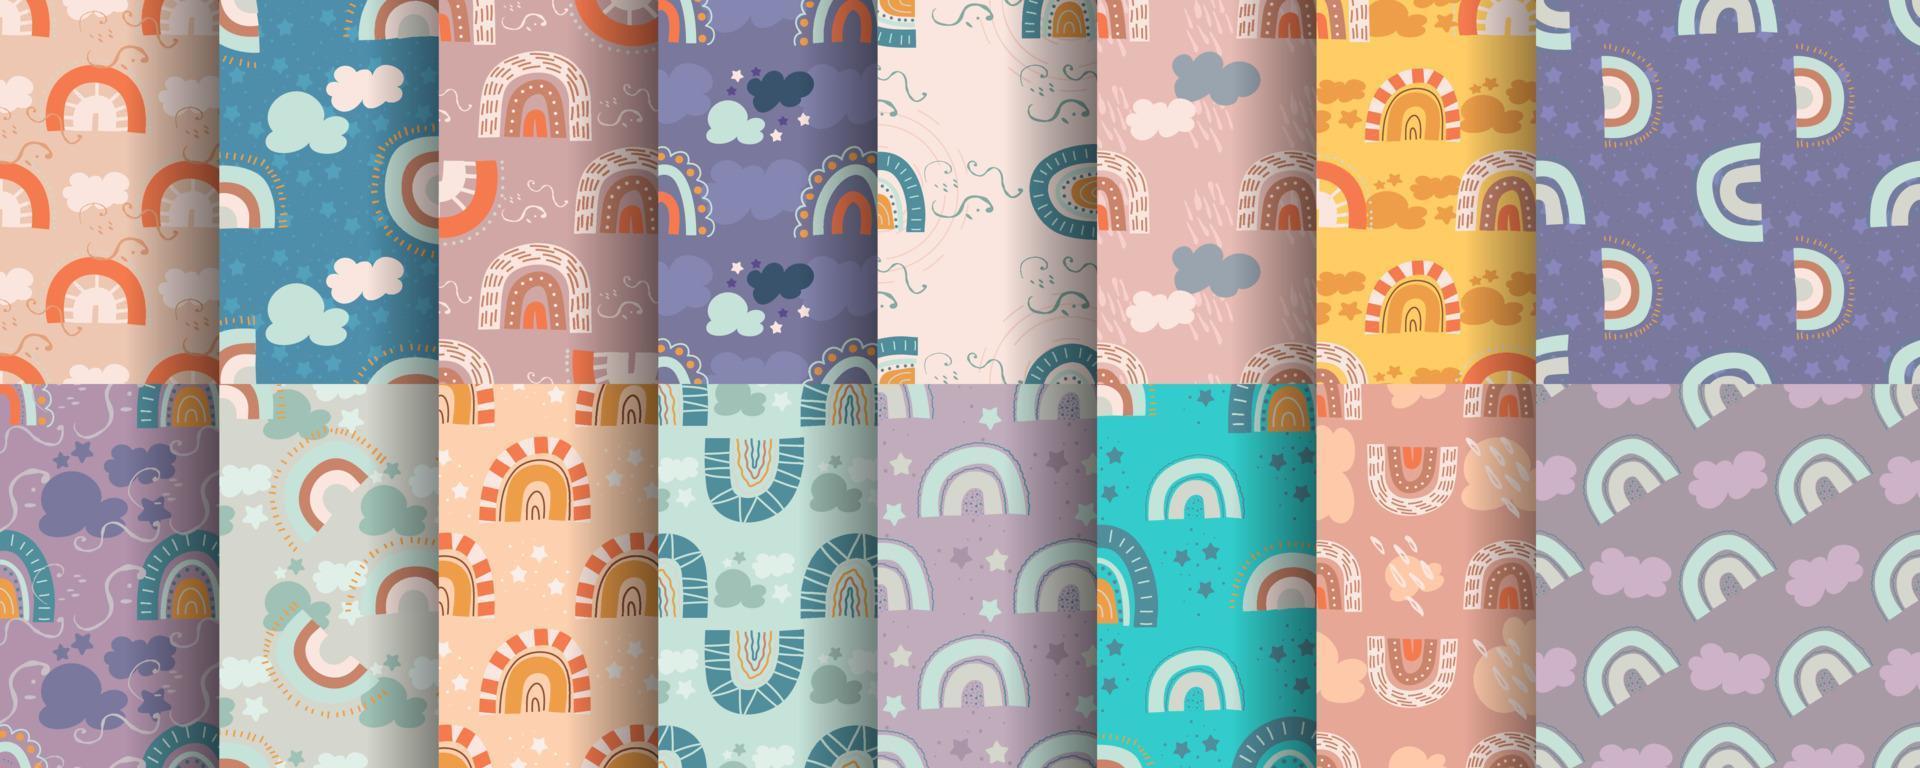 Set of seamless patterns with rainbows in organic handdrawn style.Rainbows, clouds and stars in a set for children's textiles. Vector illustration in flat style.